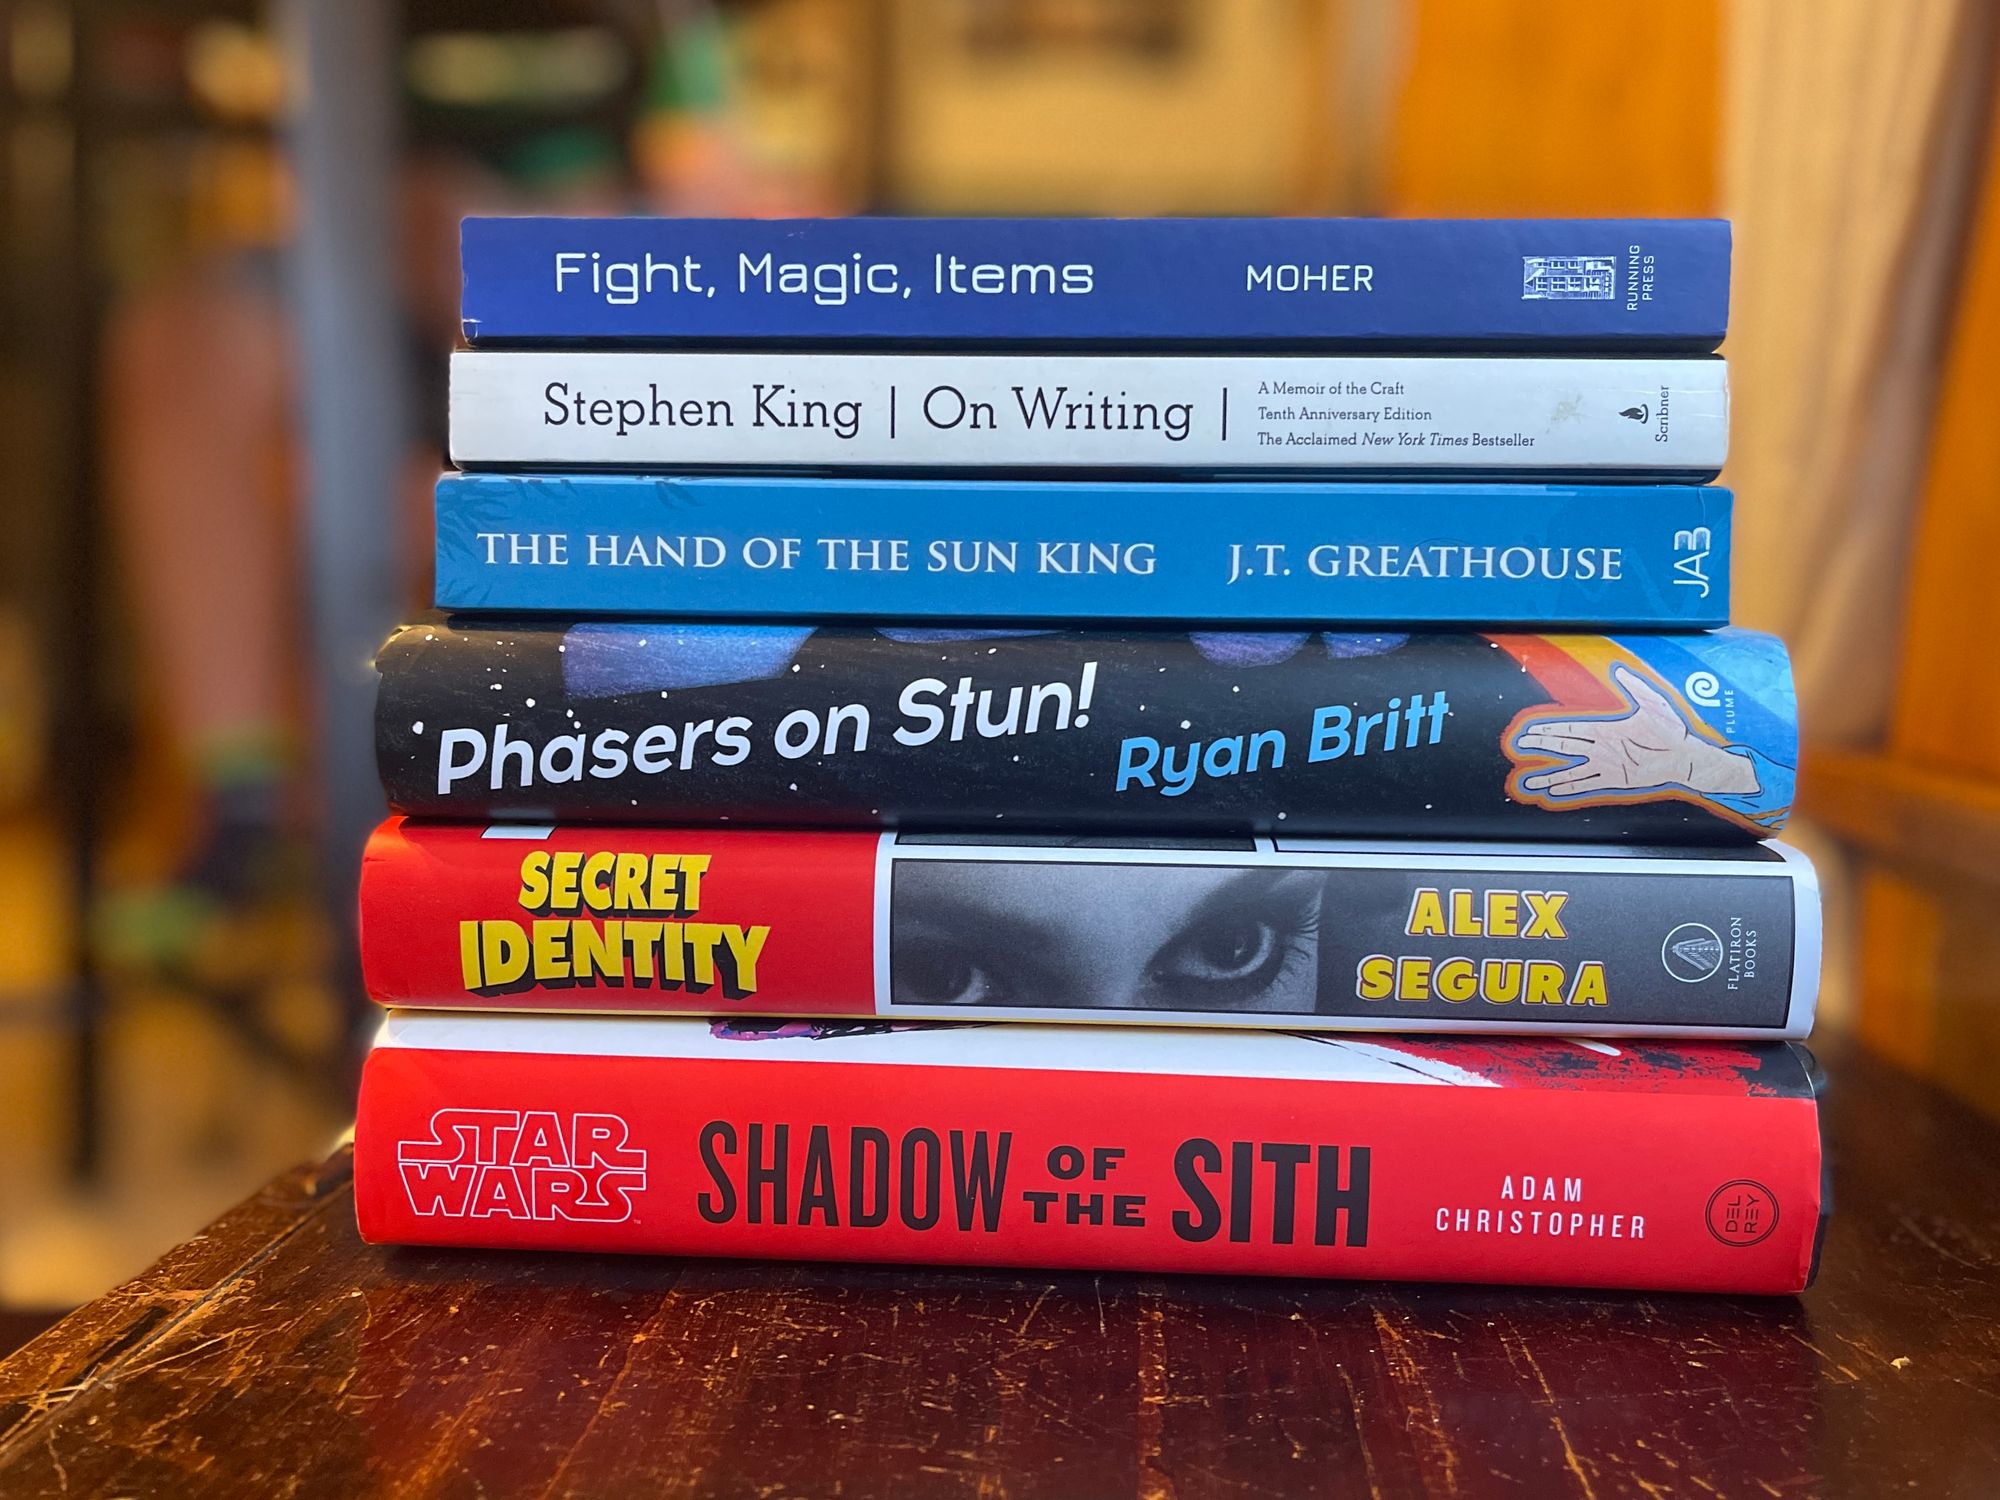 A stack of blue and red books: Fight Magic, Items, Stephen King’s On Writing, J.T. Greathouse’s The Hand of the Sun King, Phasers on Stun by Ryan Britt, Secret Identity by Alex Segura, and Shadow of the Sith by Adam Christopher